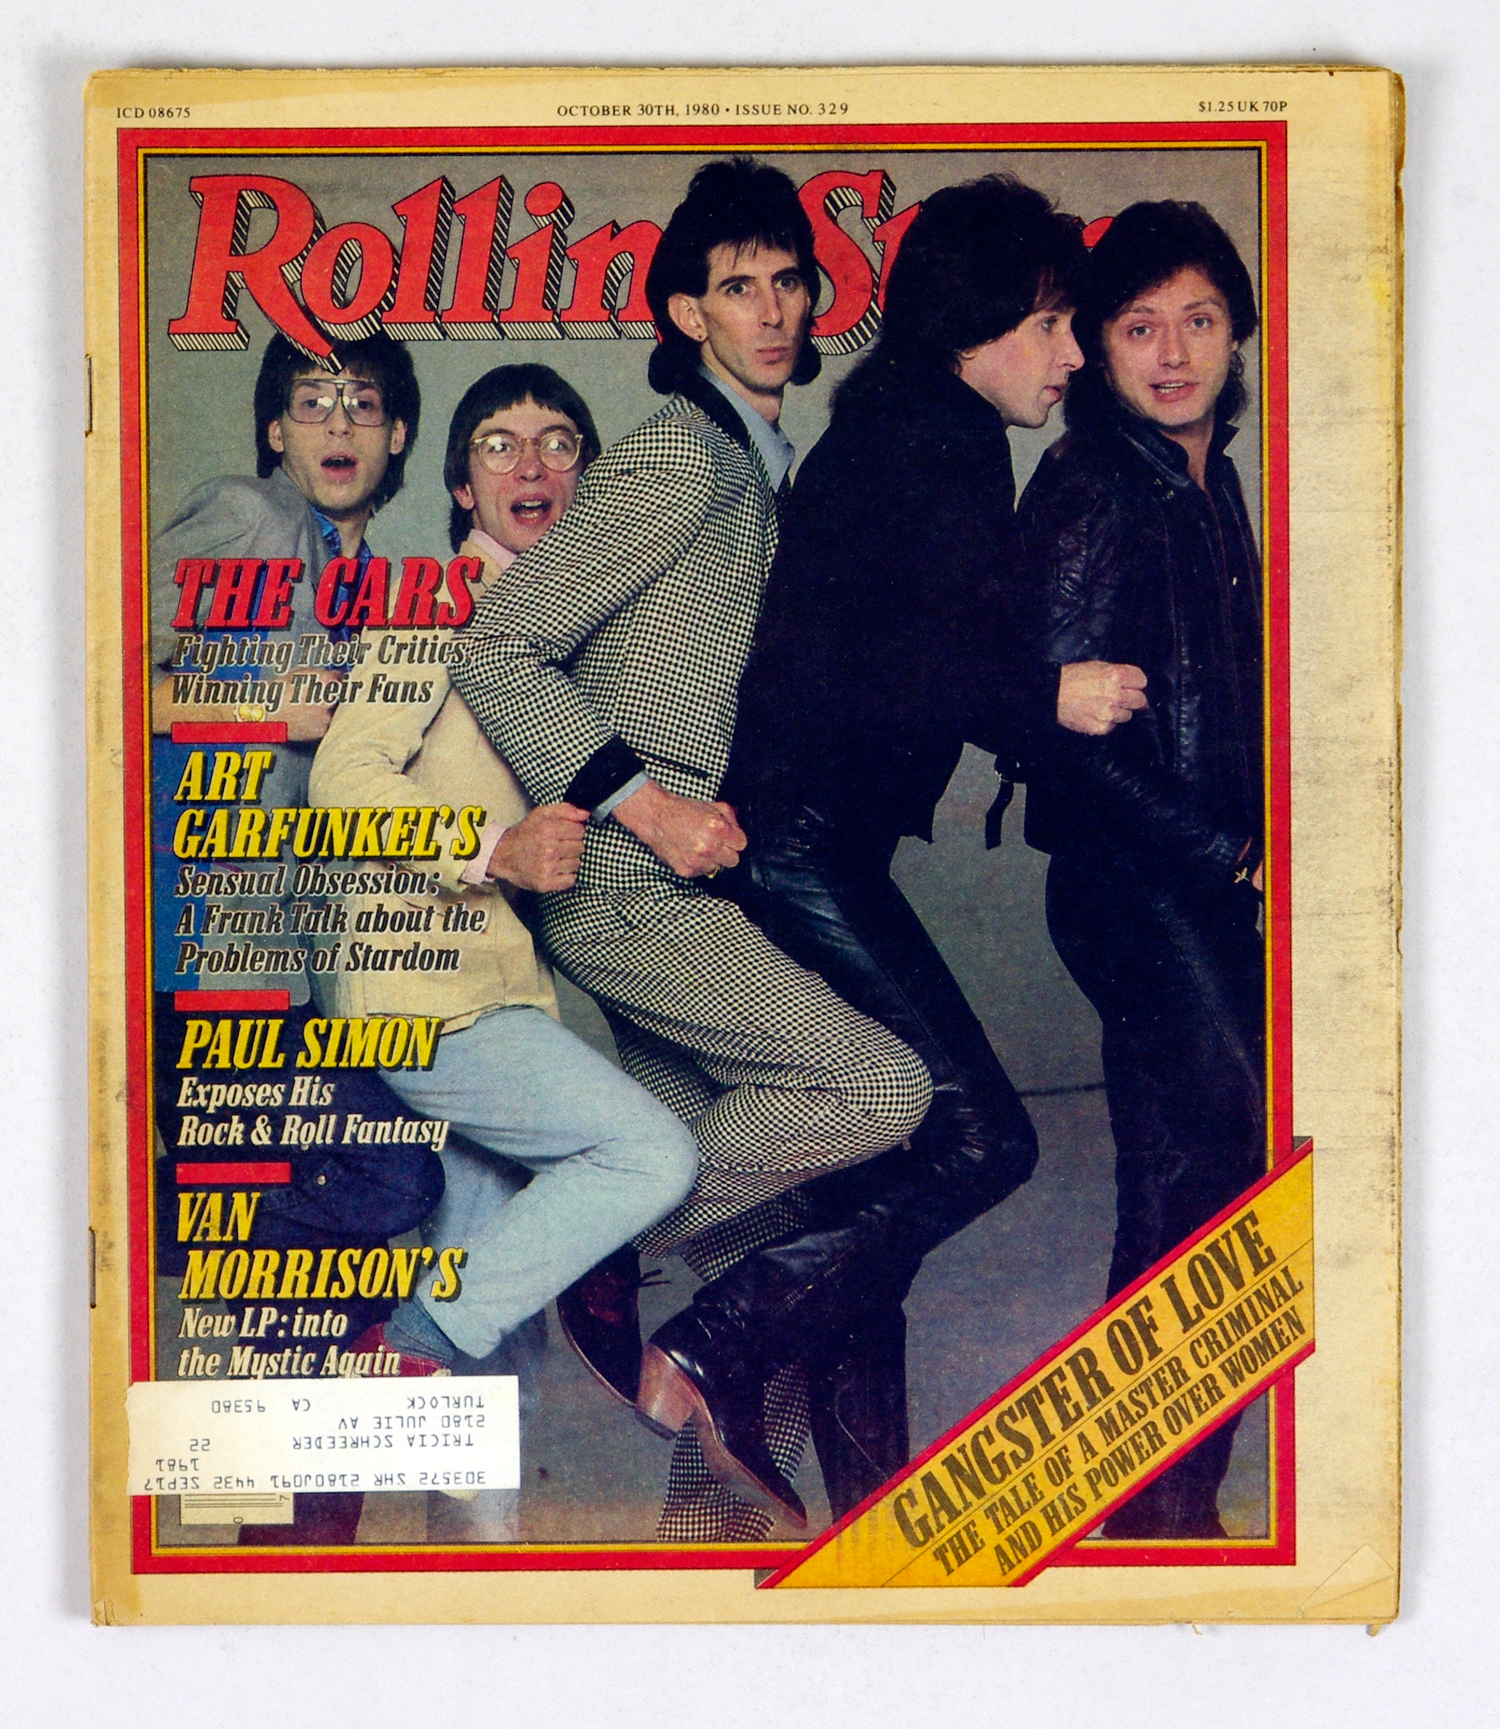 Rolling Stone Magazine Back Issue 1980 Oct 30 No. 329 The Cars 